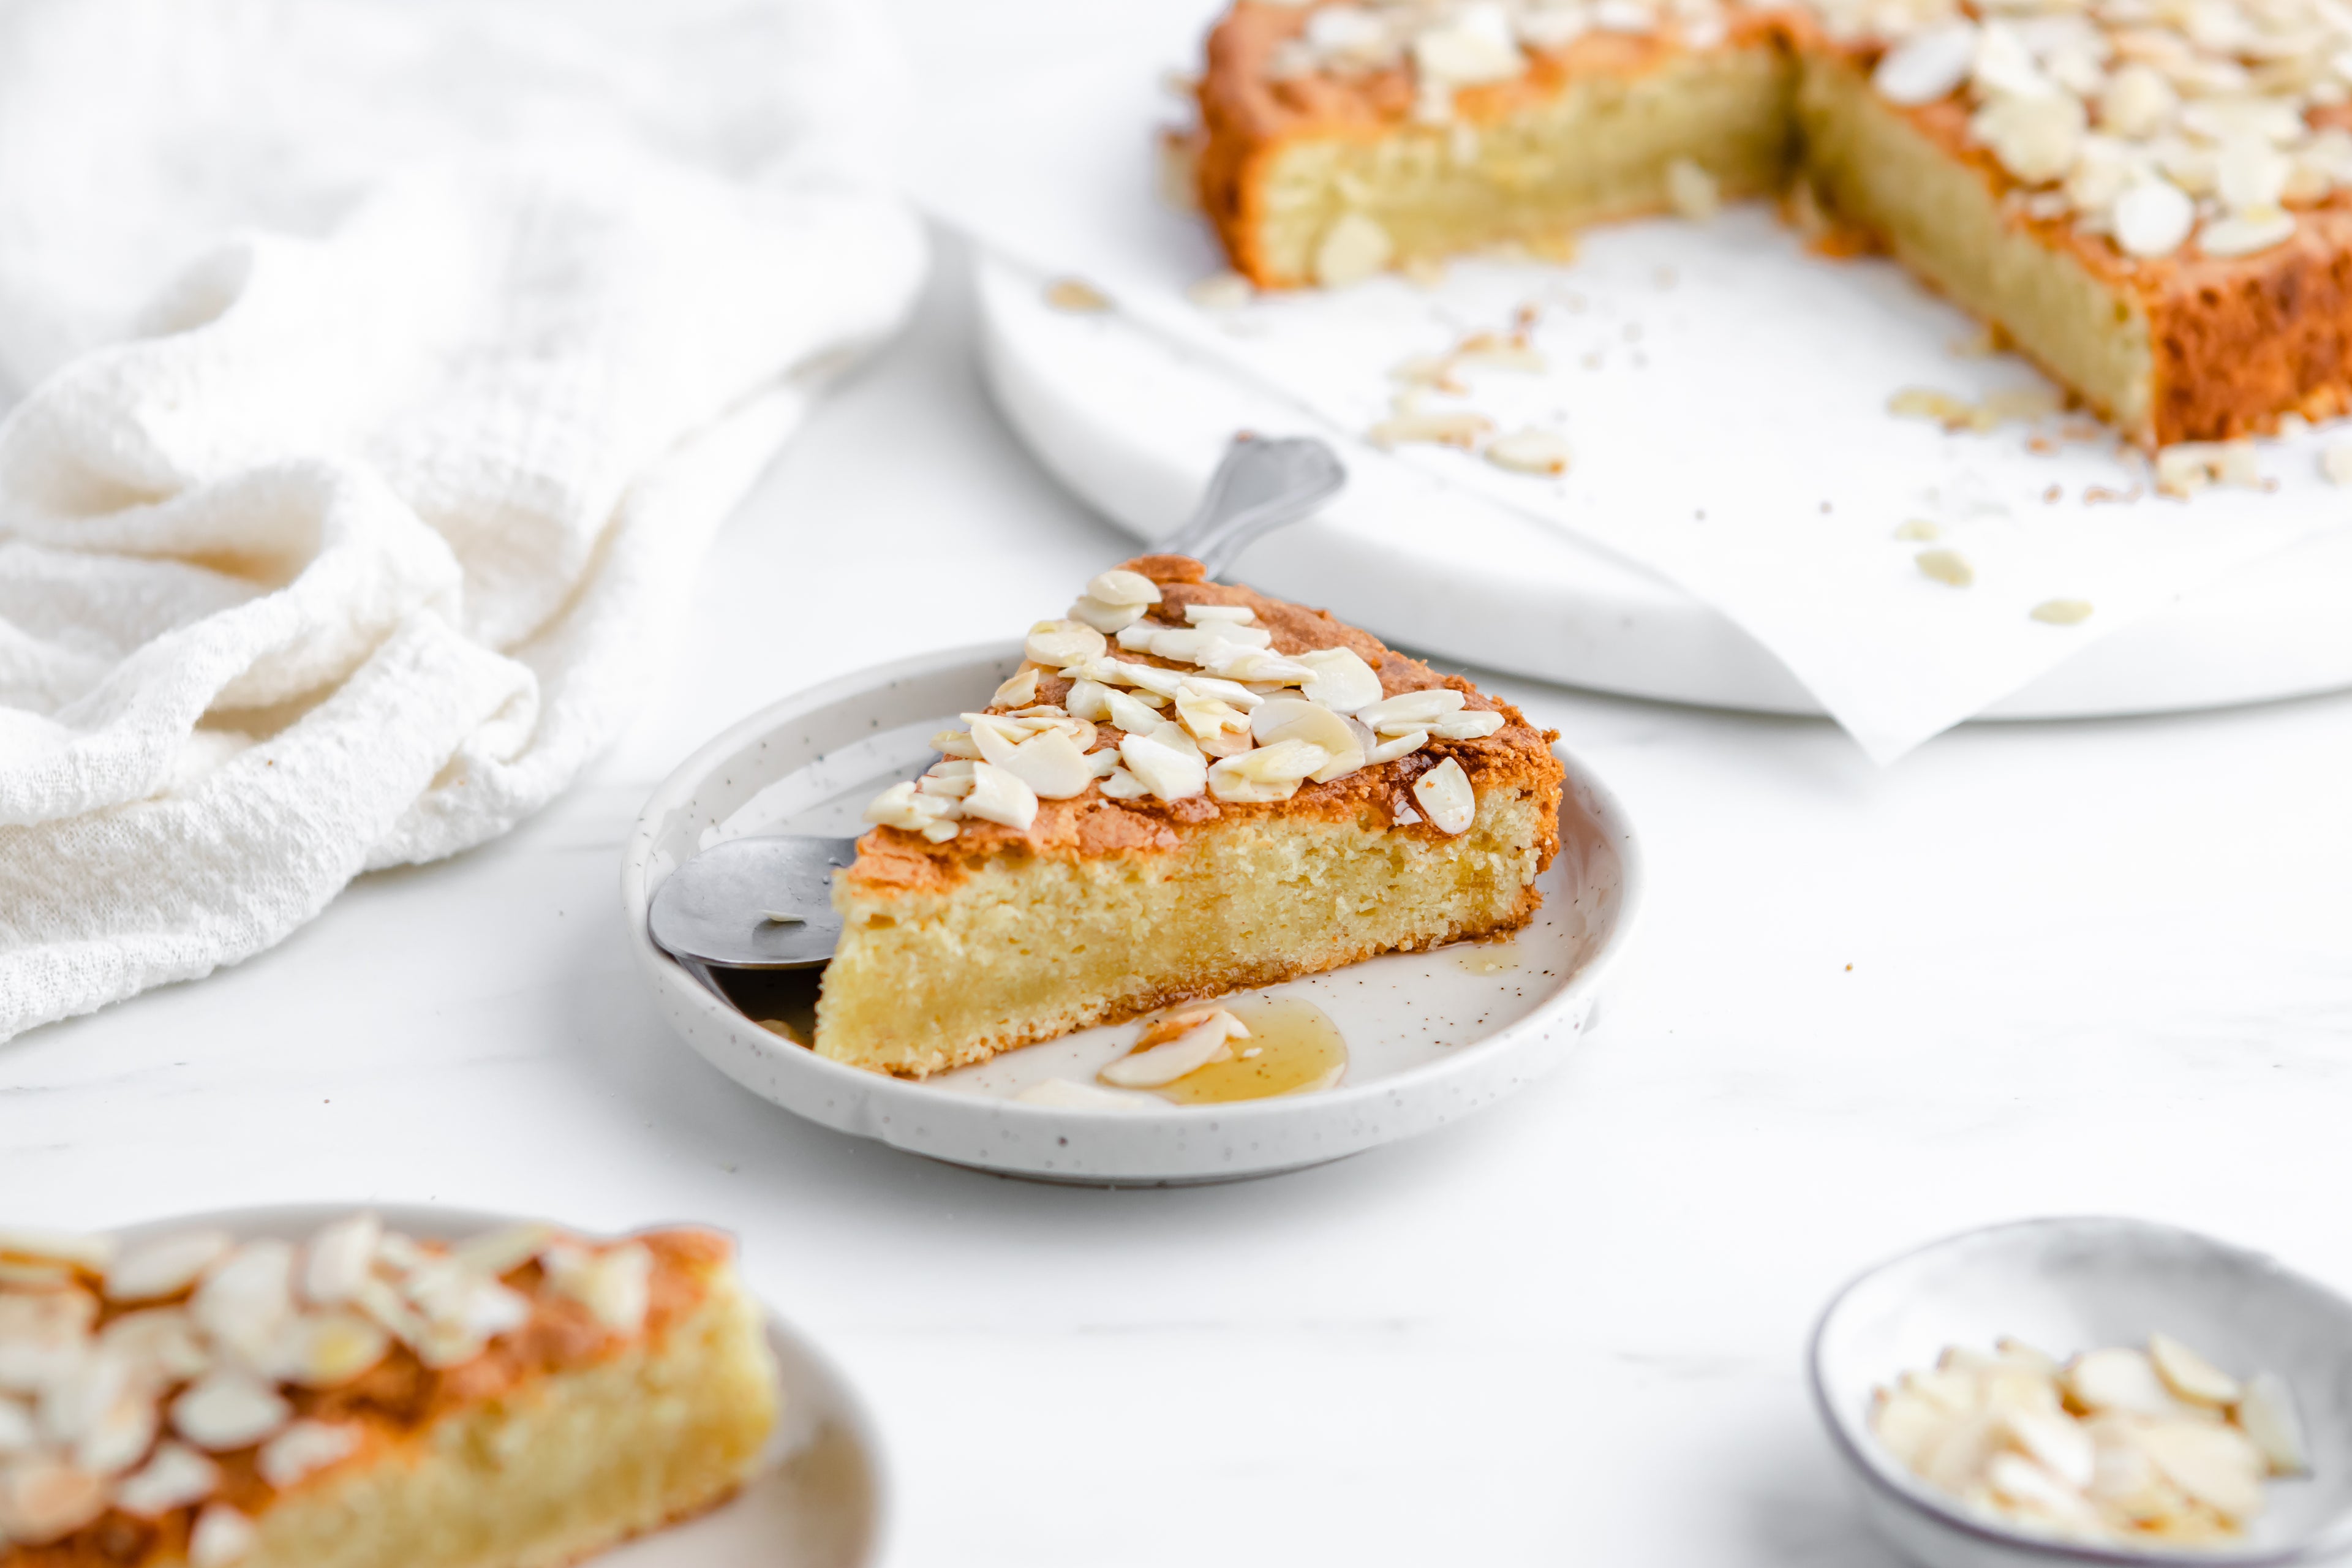 A slice of almond cake, with a drizzle of honey and a spoon